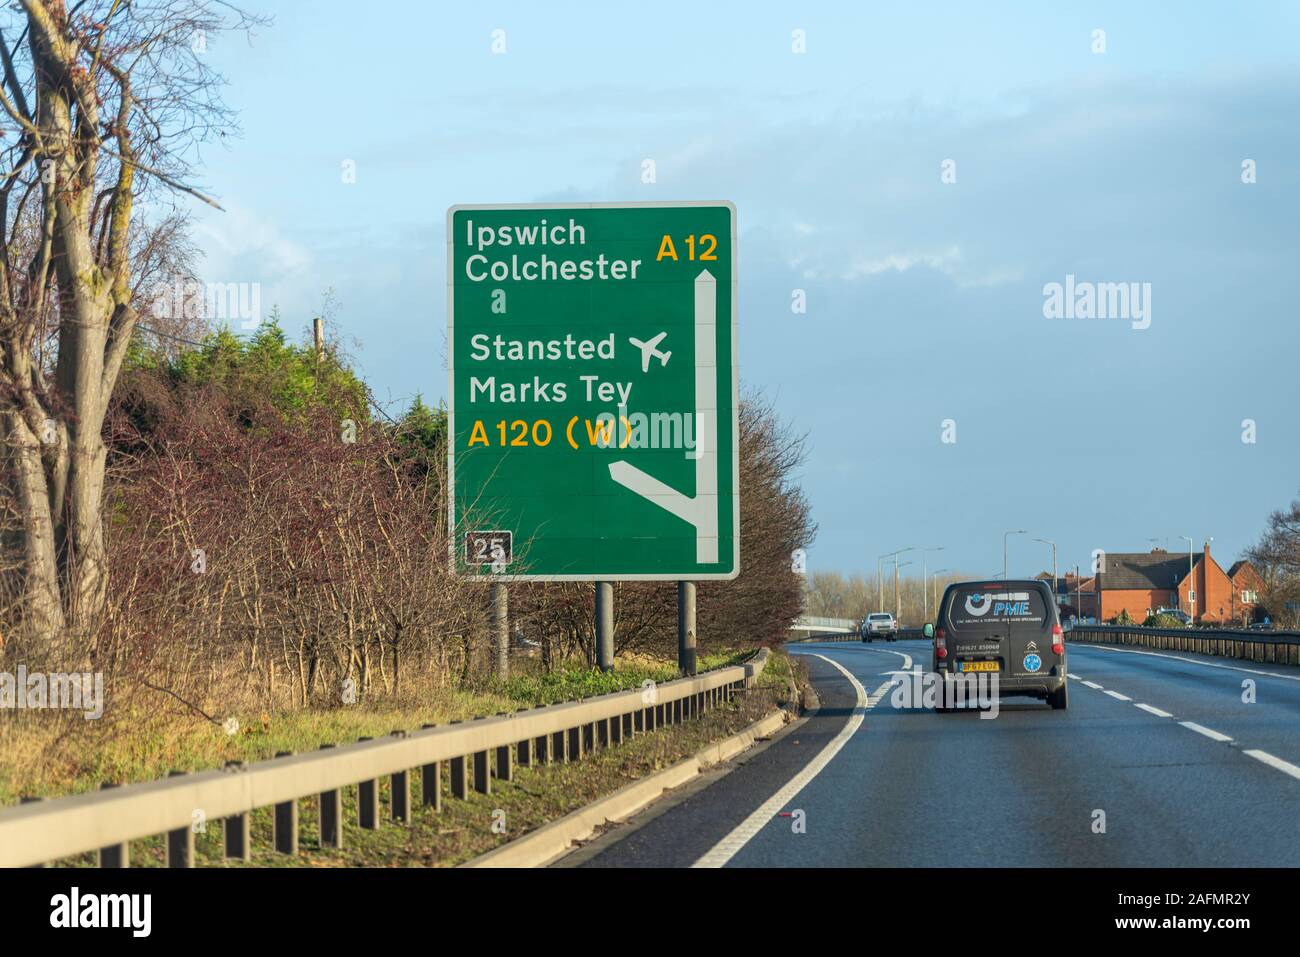 Direction sign for Ipswich, Colchester, Stansted airport, Marks Tey, A120 with vehicles driving on a stretch of A12 duel carriageway, Essex, UK. Stock Photo